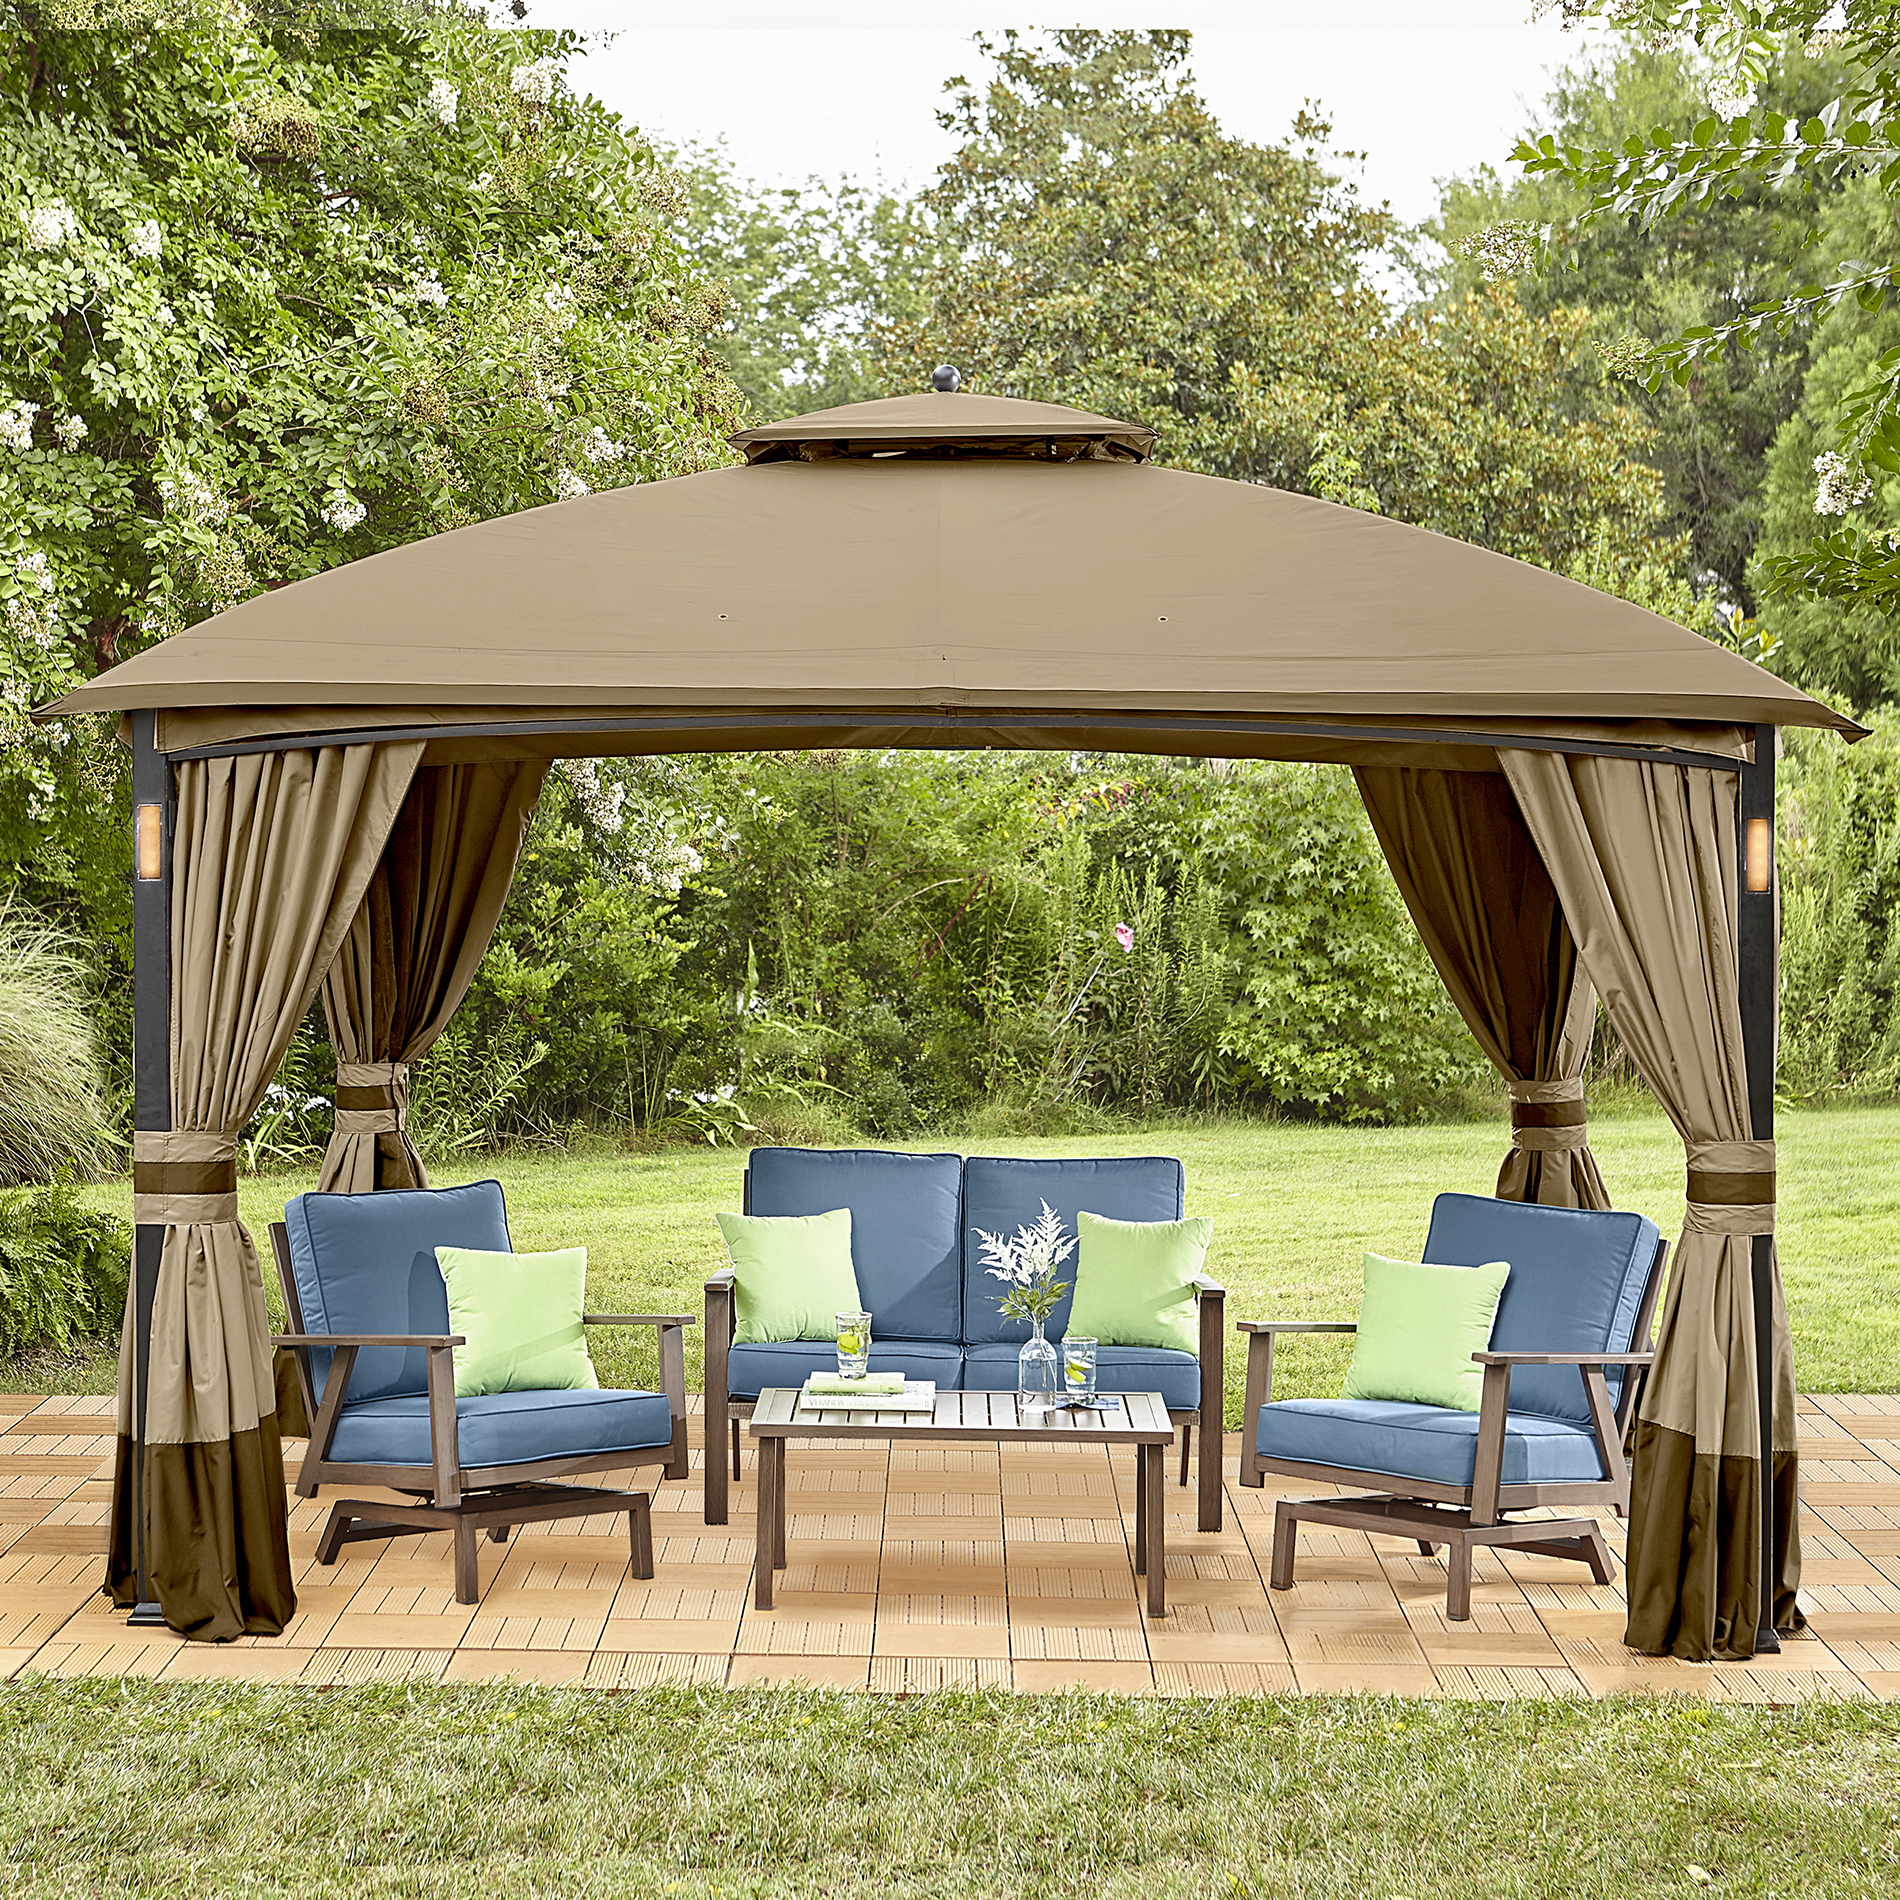 Garden Oasis Moorehead Musi And Lighted Gazebo With Urtain And